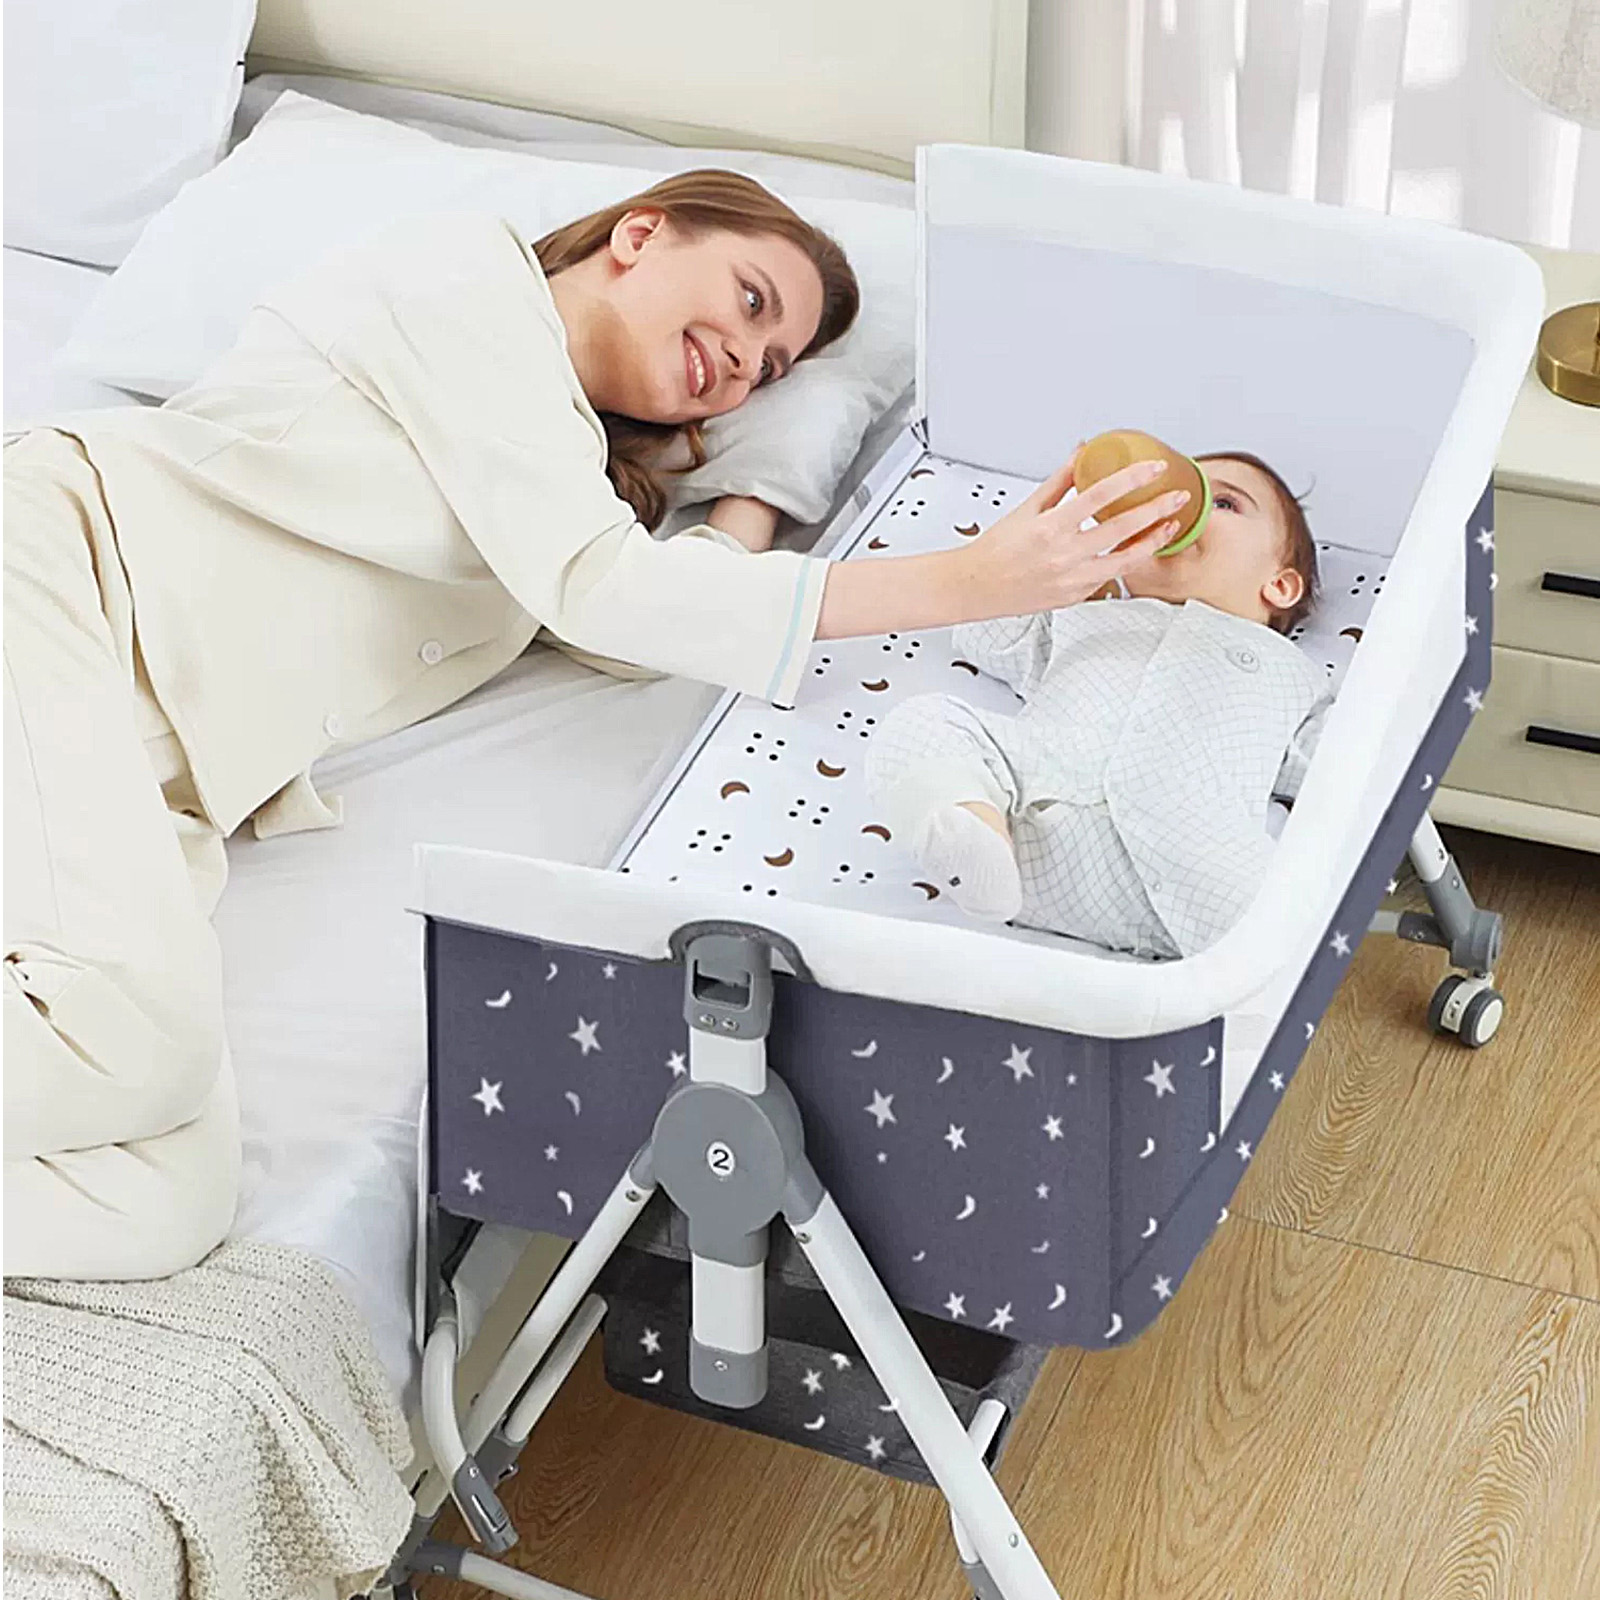 EONROACOO Foldable Baby Bassinet with Changing Table, Adjustable Bedside Crib for Infant, Moyan Starry Sky - image 4 of 11